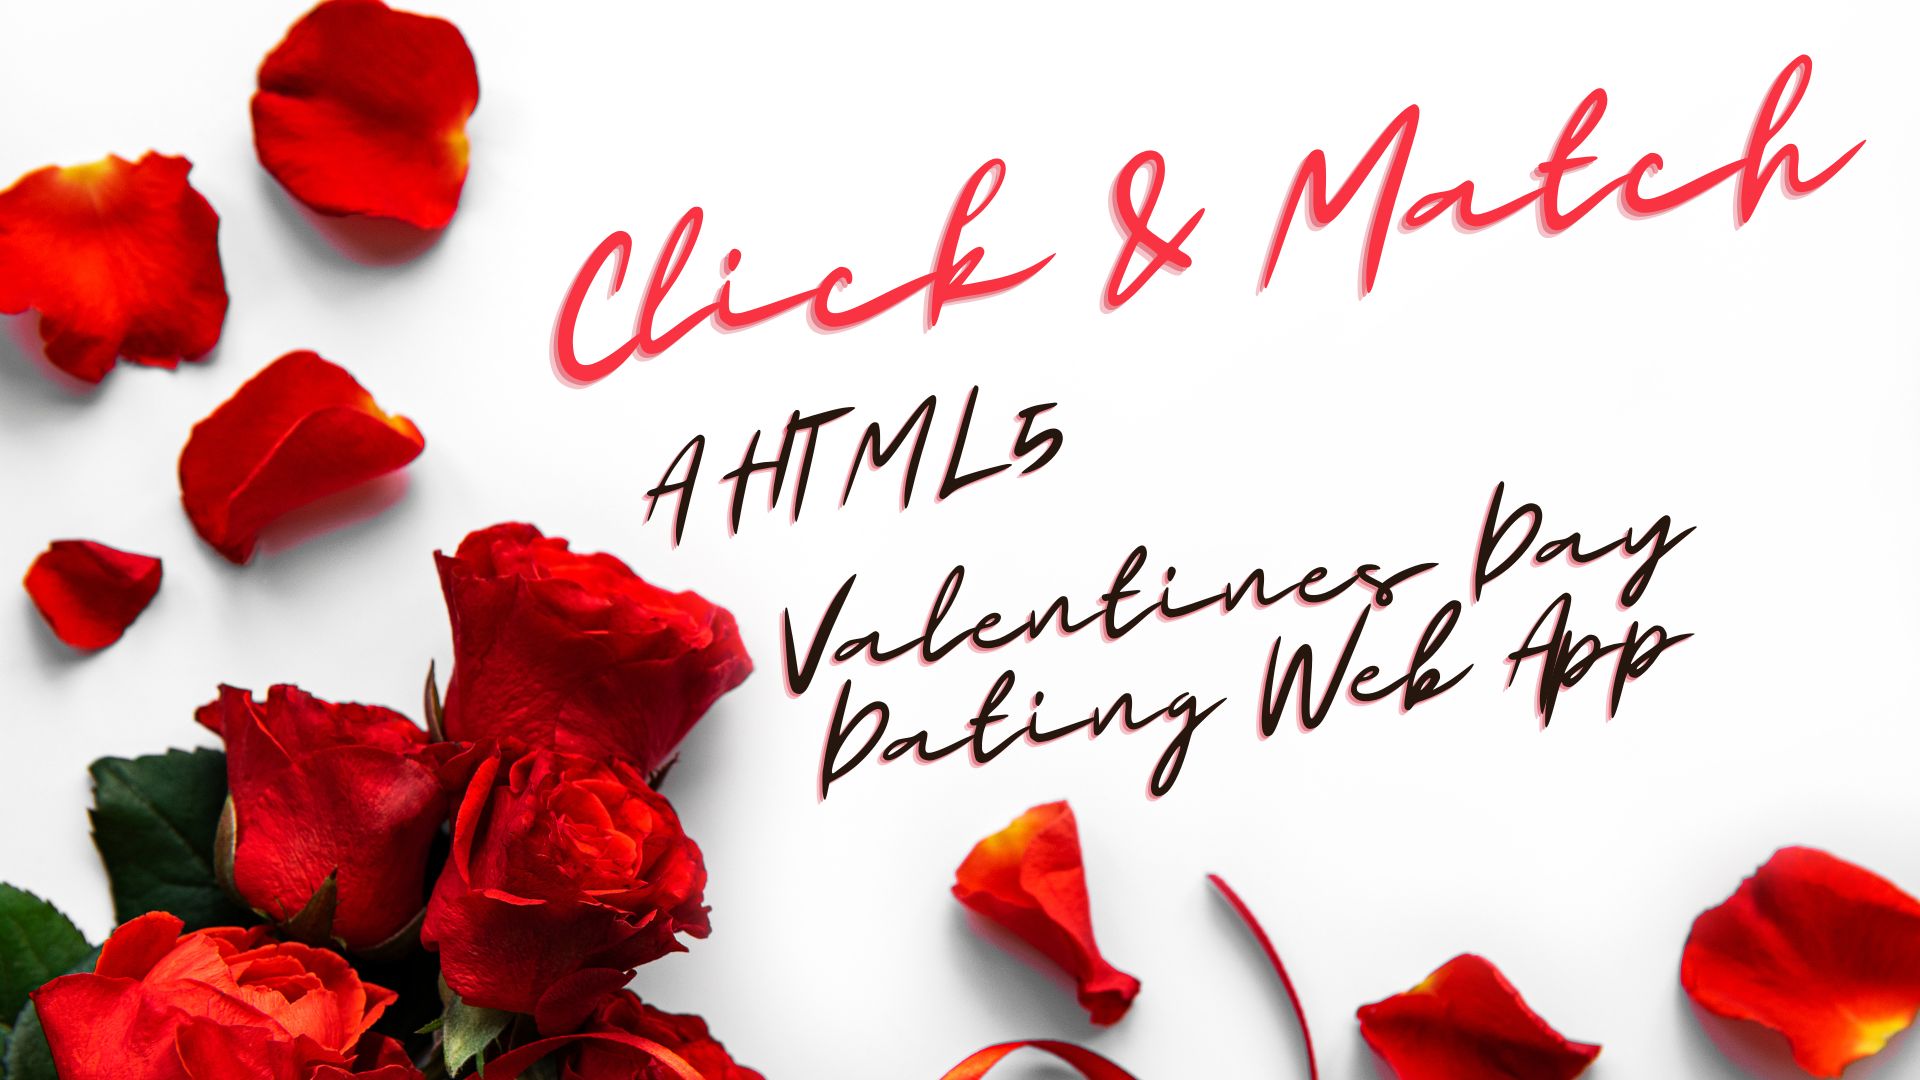 Click and Match - a HTML5 Valentine’s day dating web-app